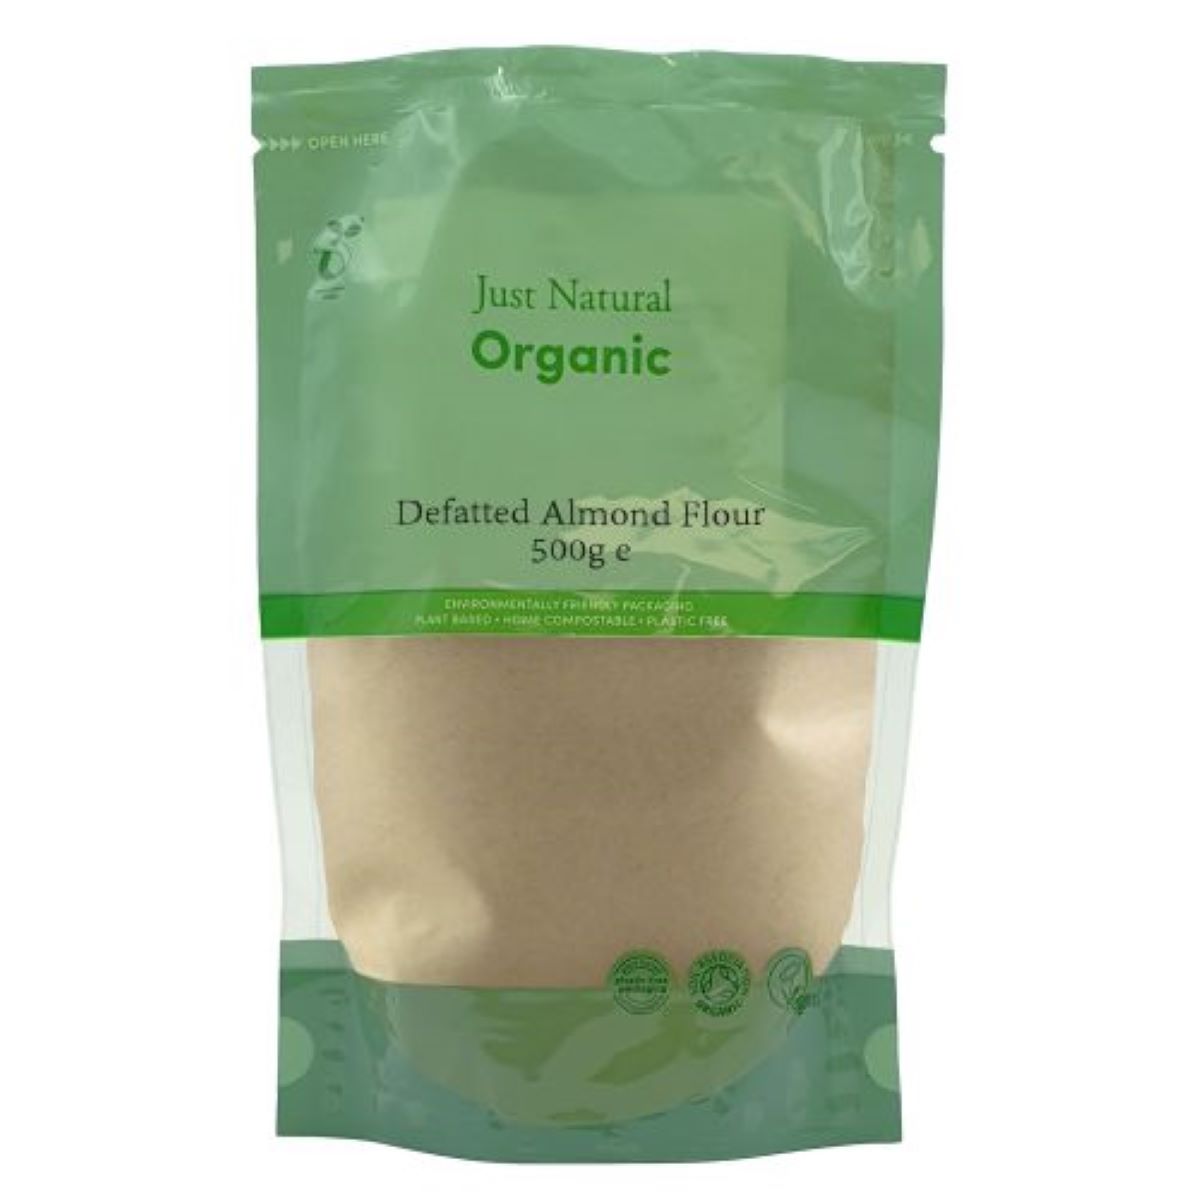 Just Natural Organic Defatted Almond Flour 500g